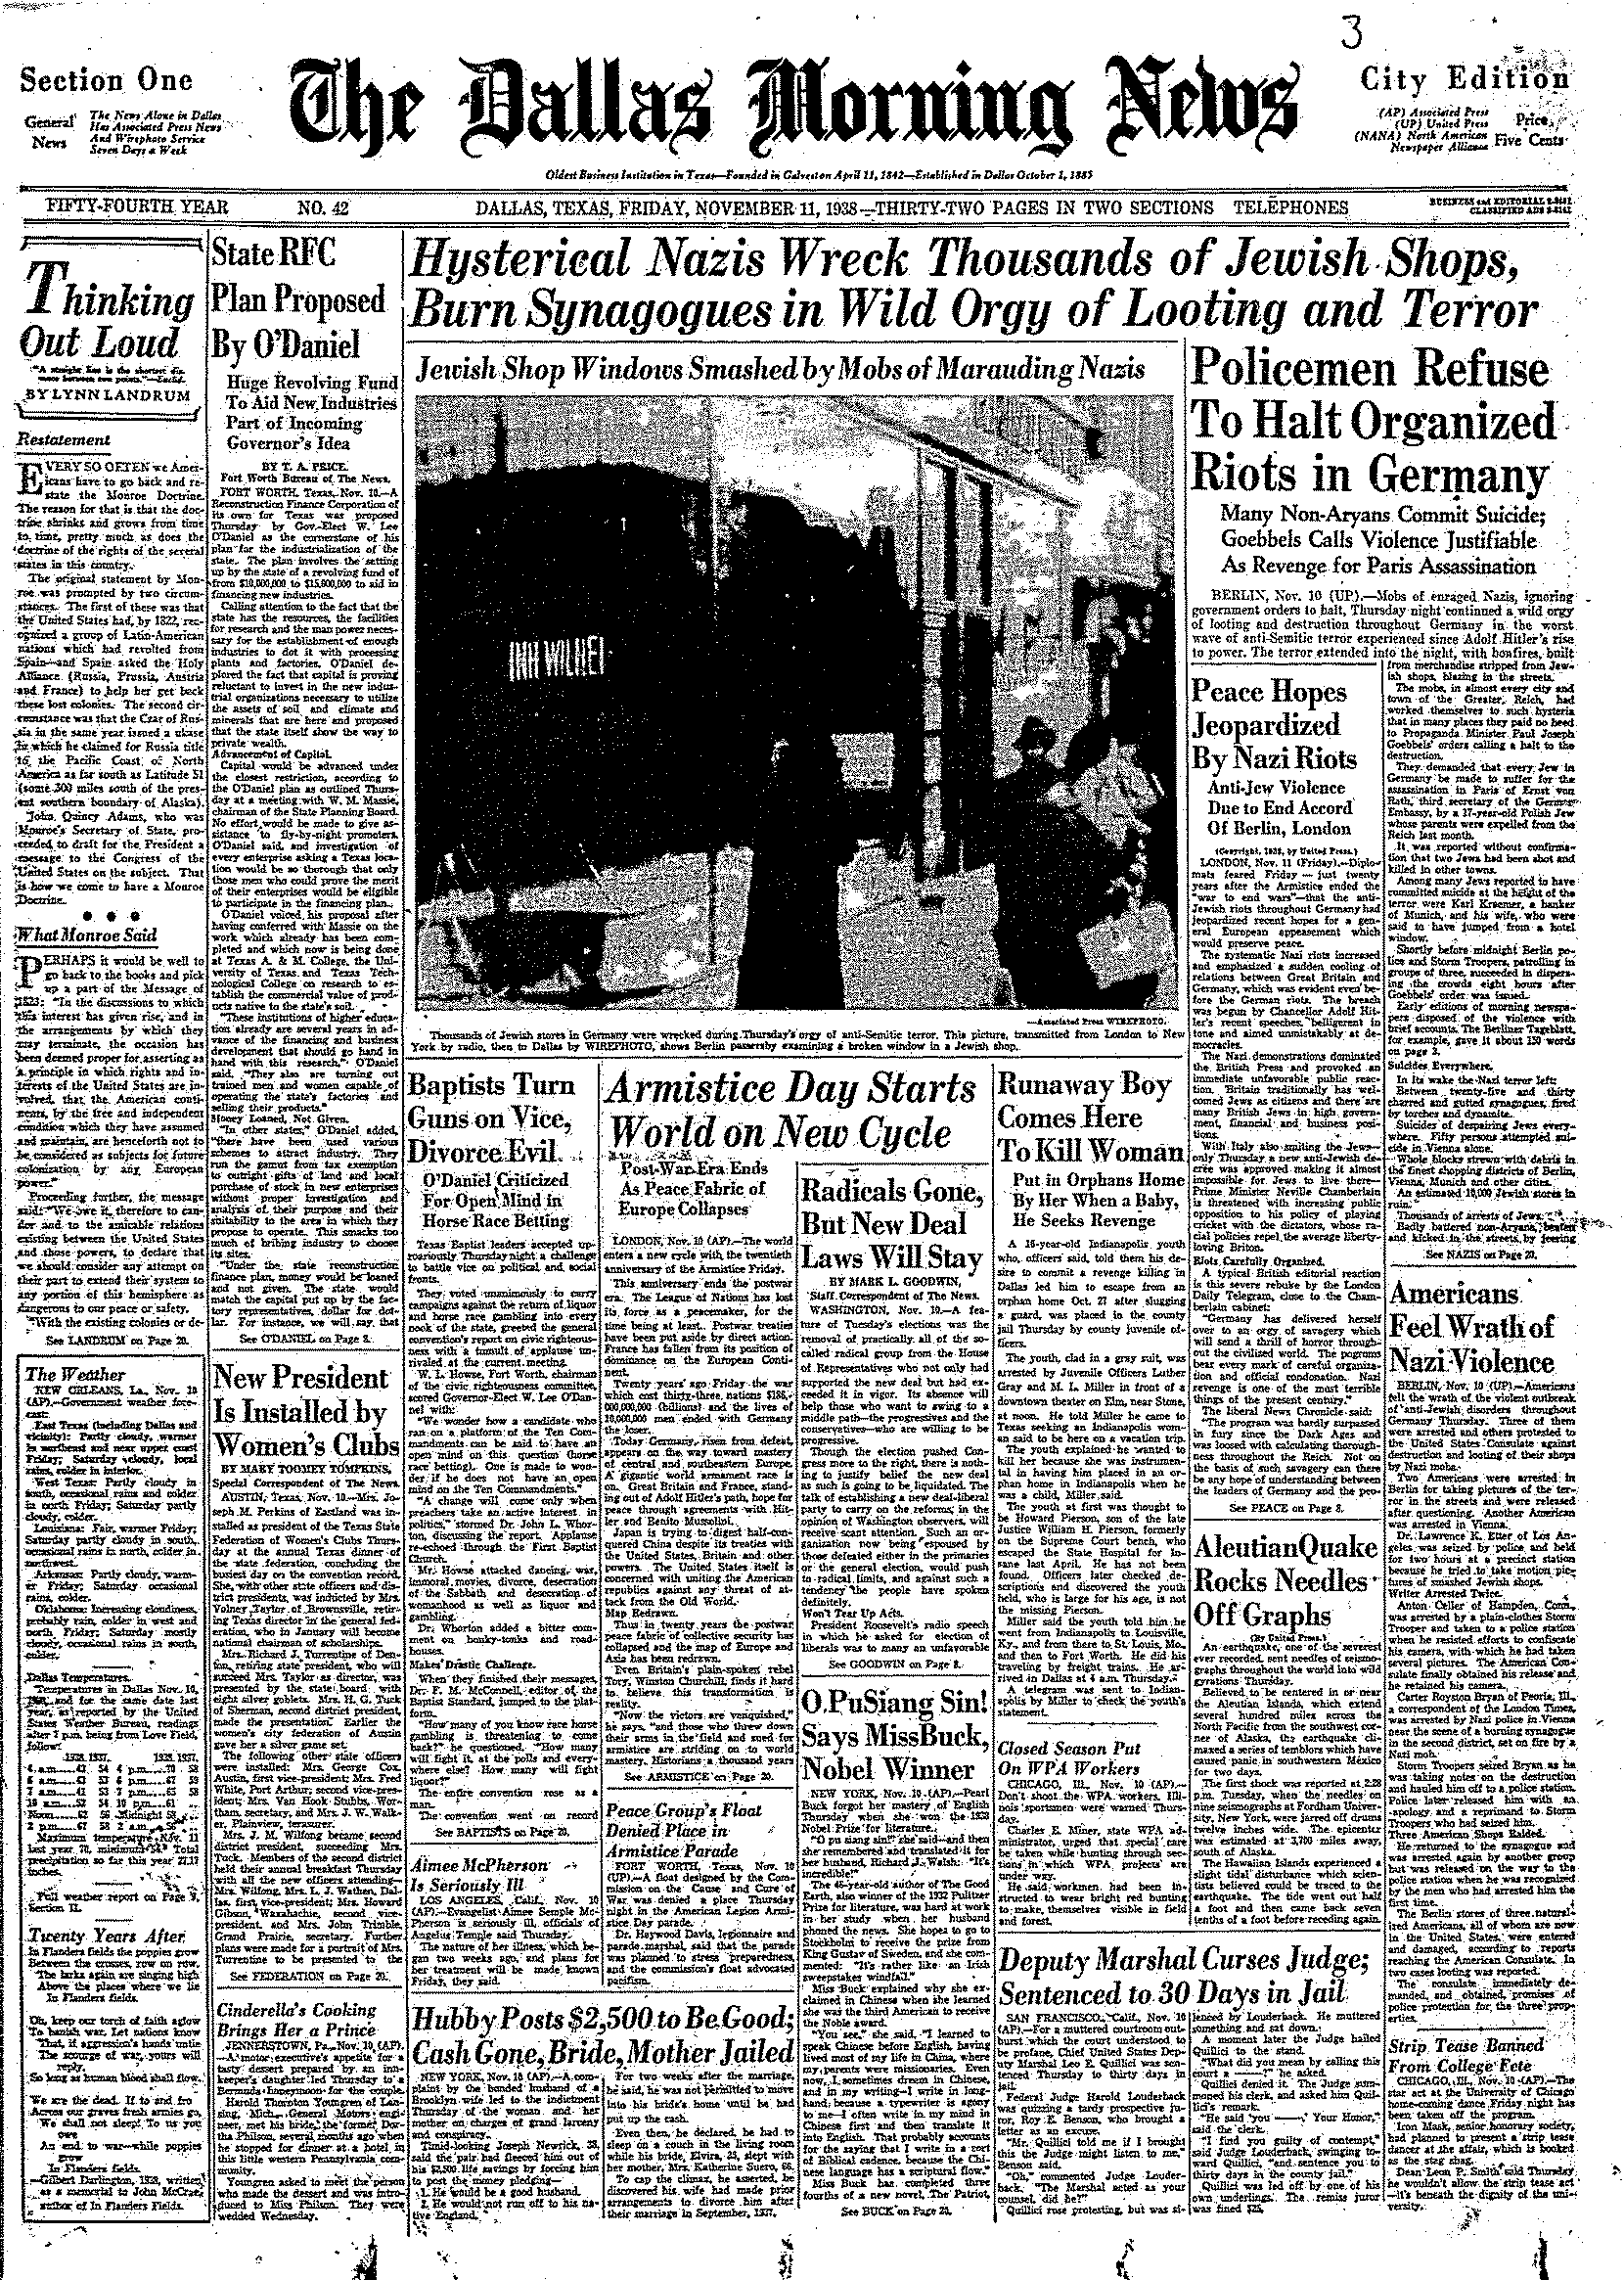 Front page of The Dallas Morning News on Nov. 11, 1938.